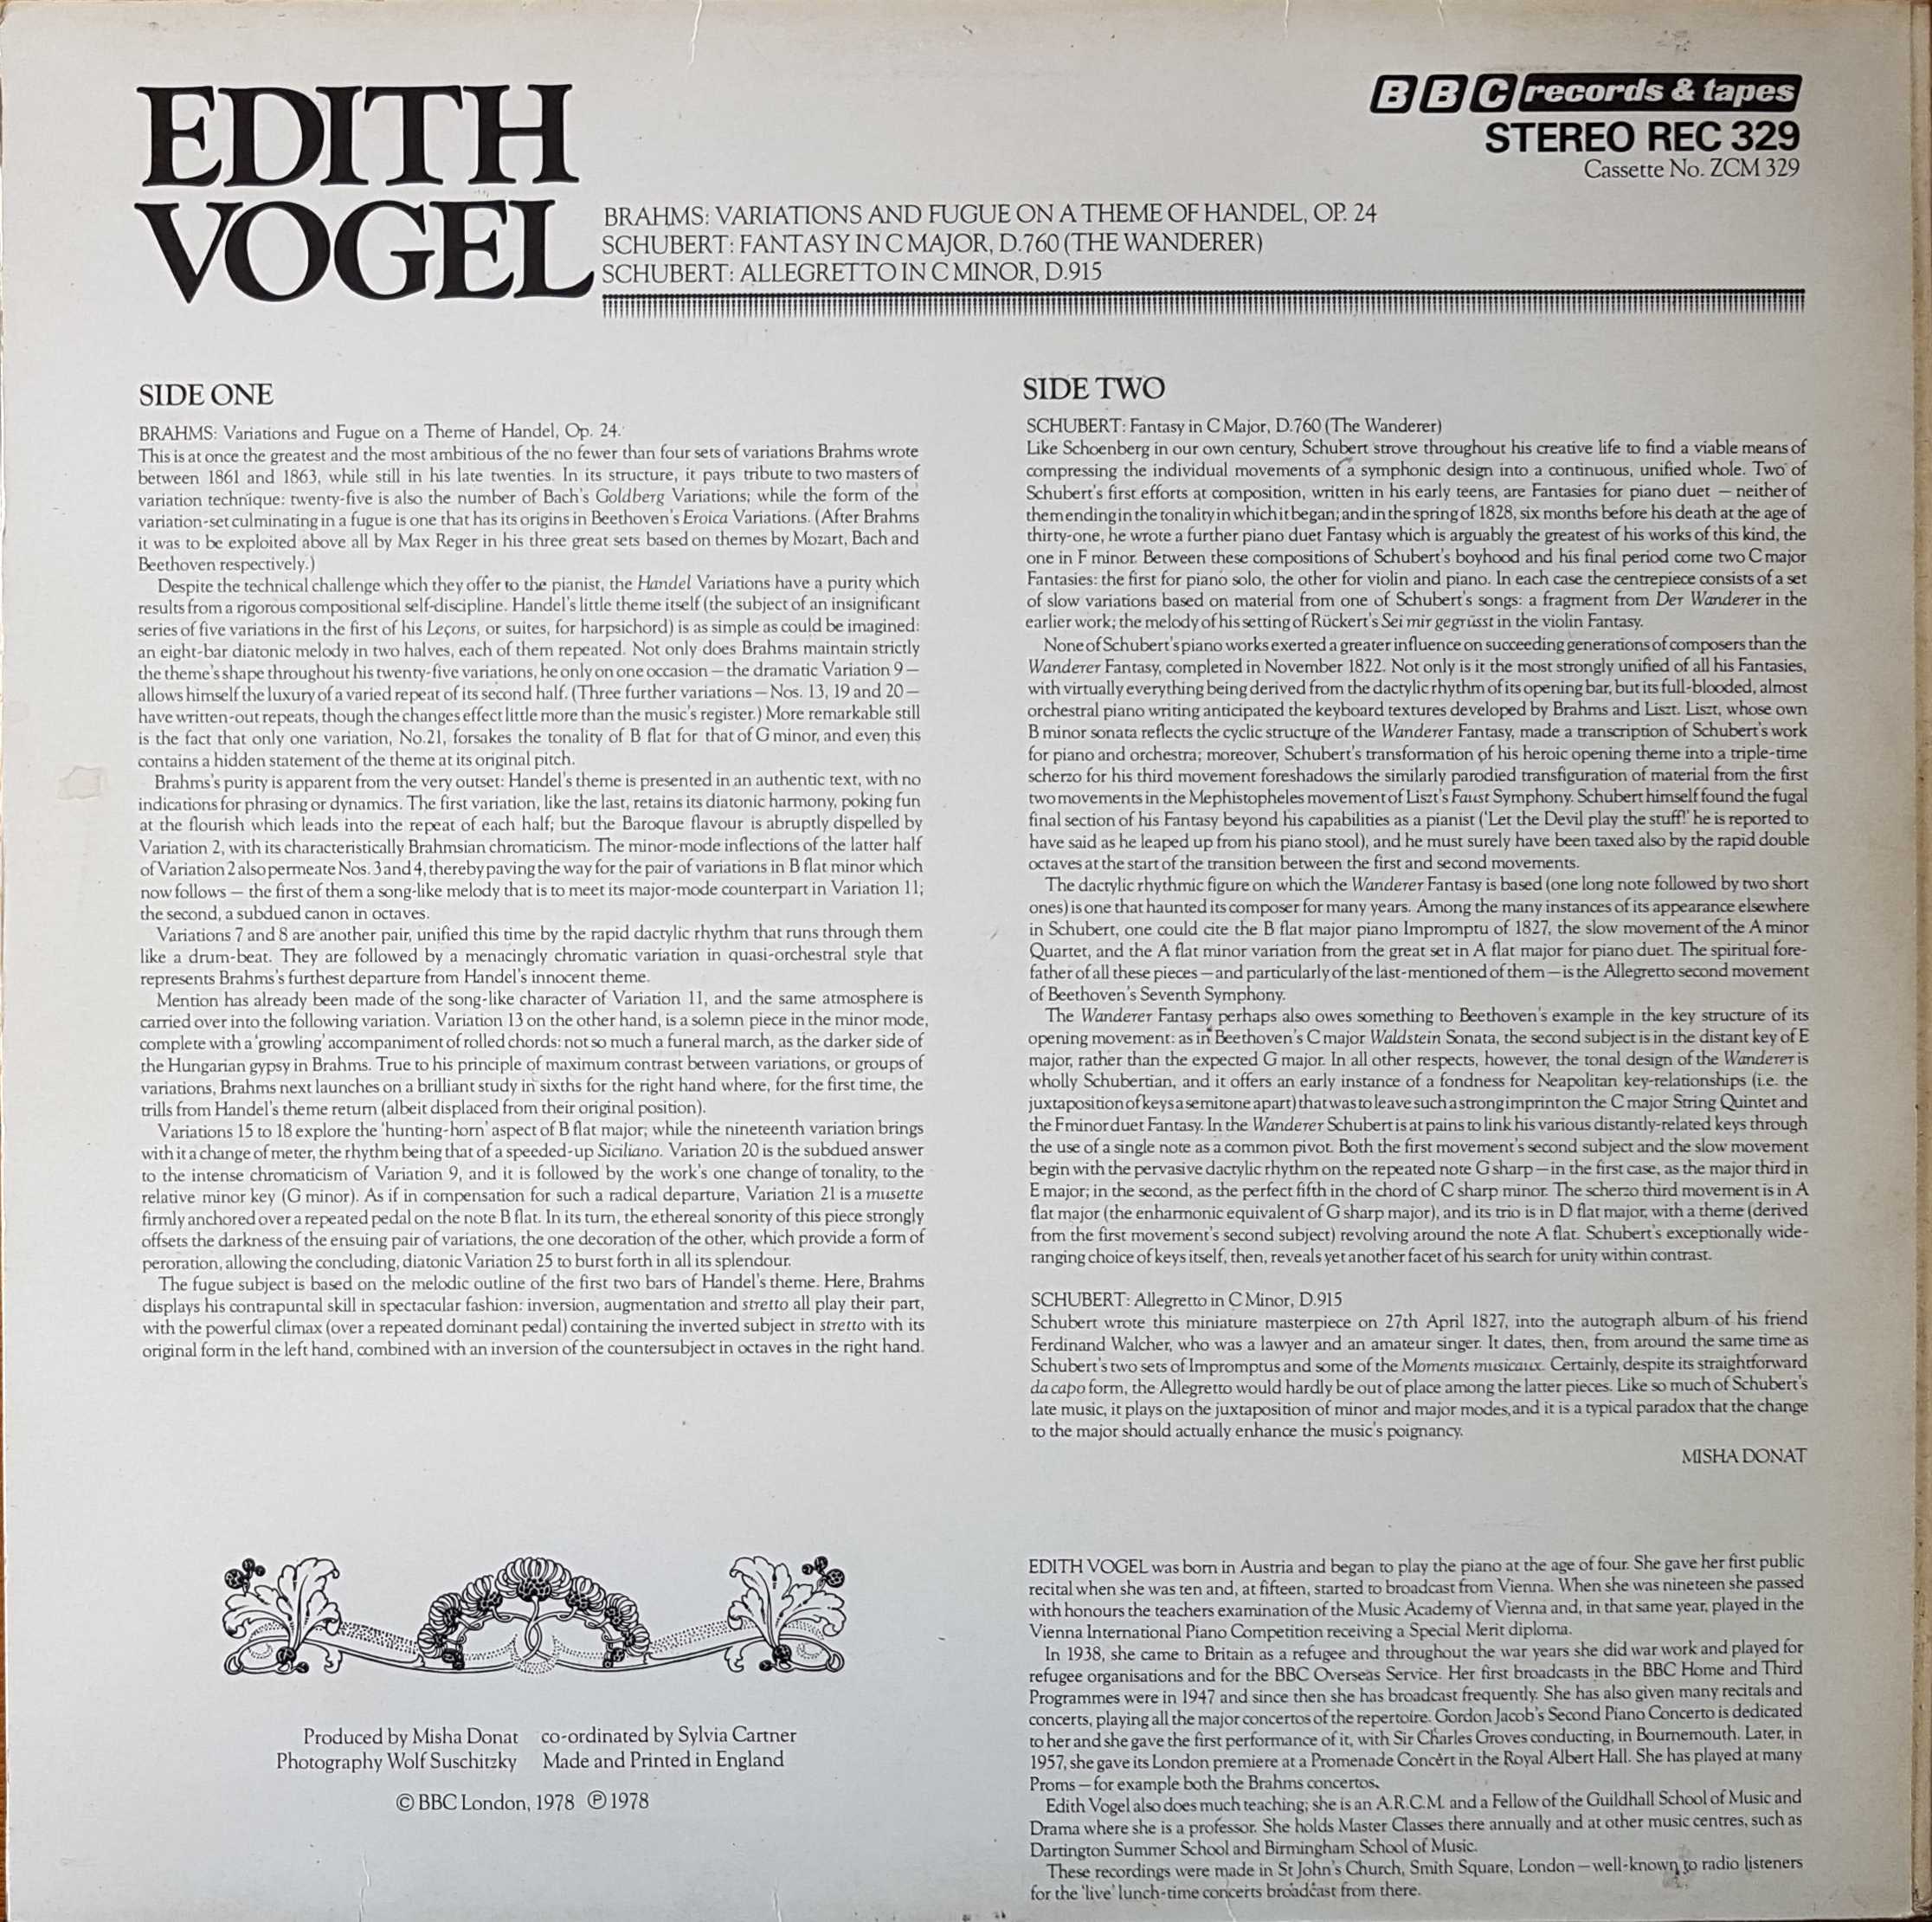 Picture of REC 329 Brahms Schubert - Edith Vogel by artist Edith Vogel from the BBC records and Tapes library